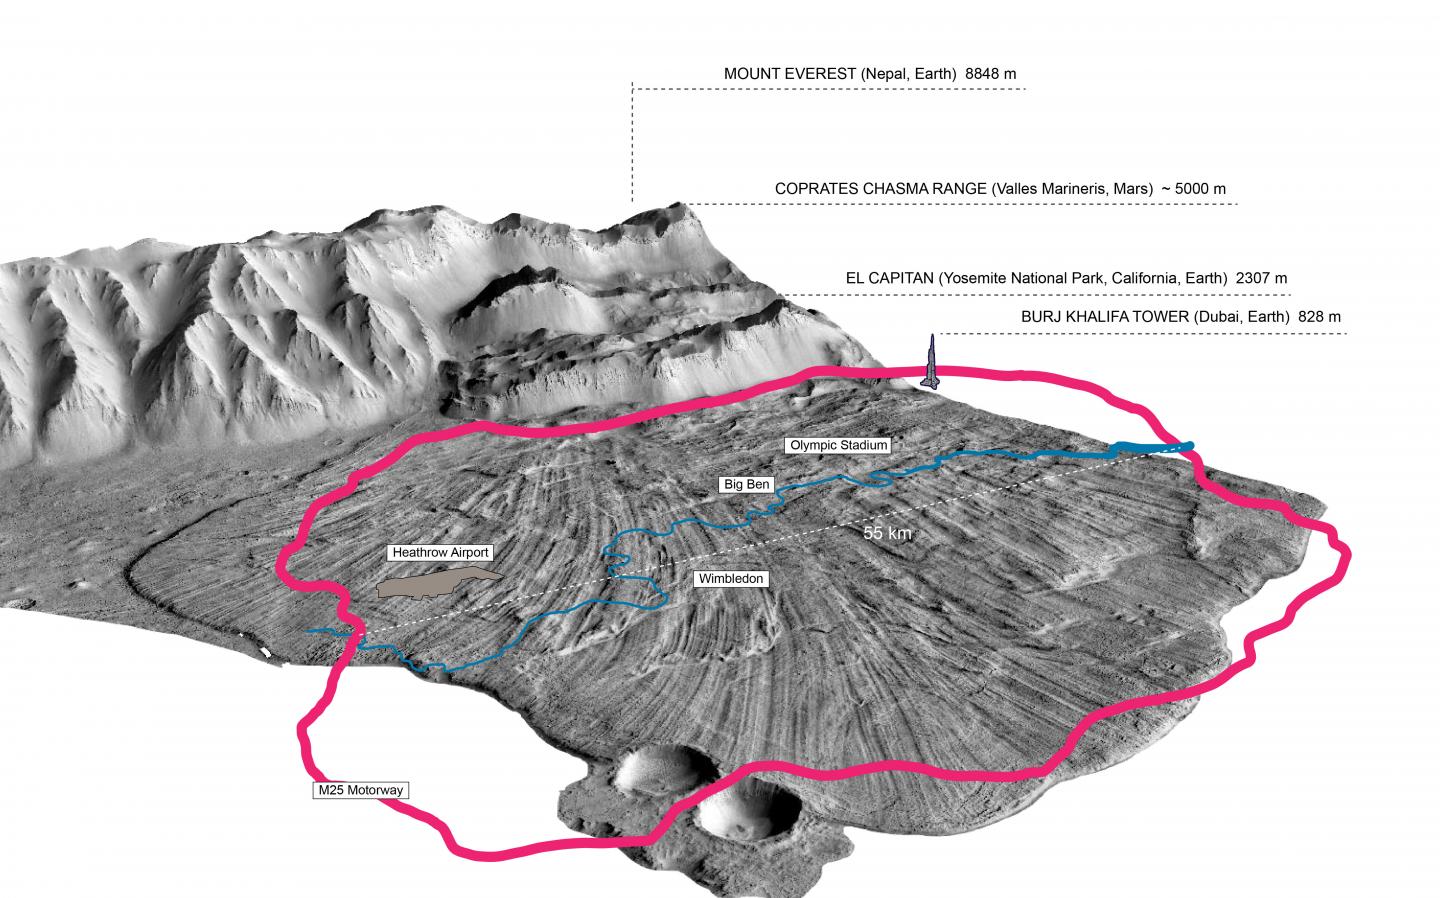 Martian Landscape Annotated with Landmarks